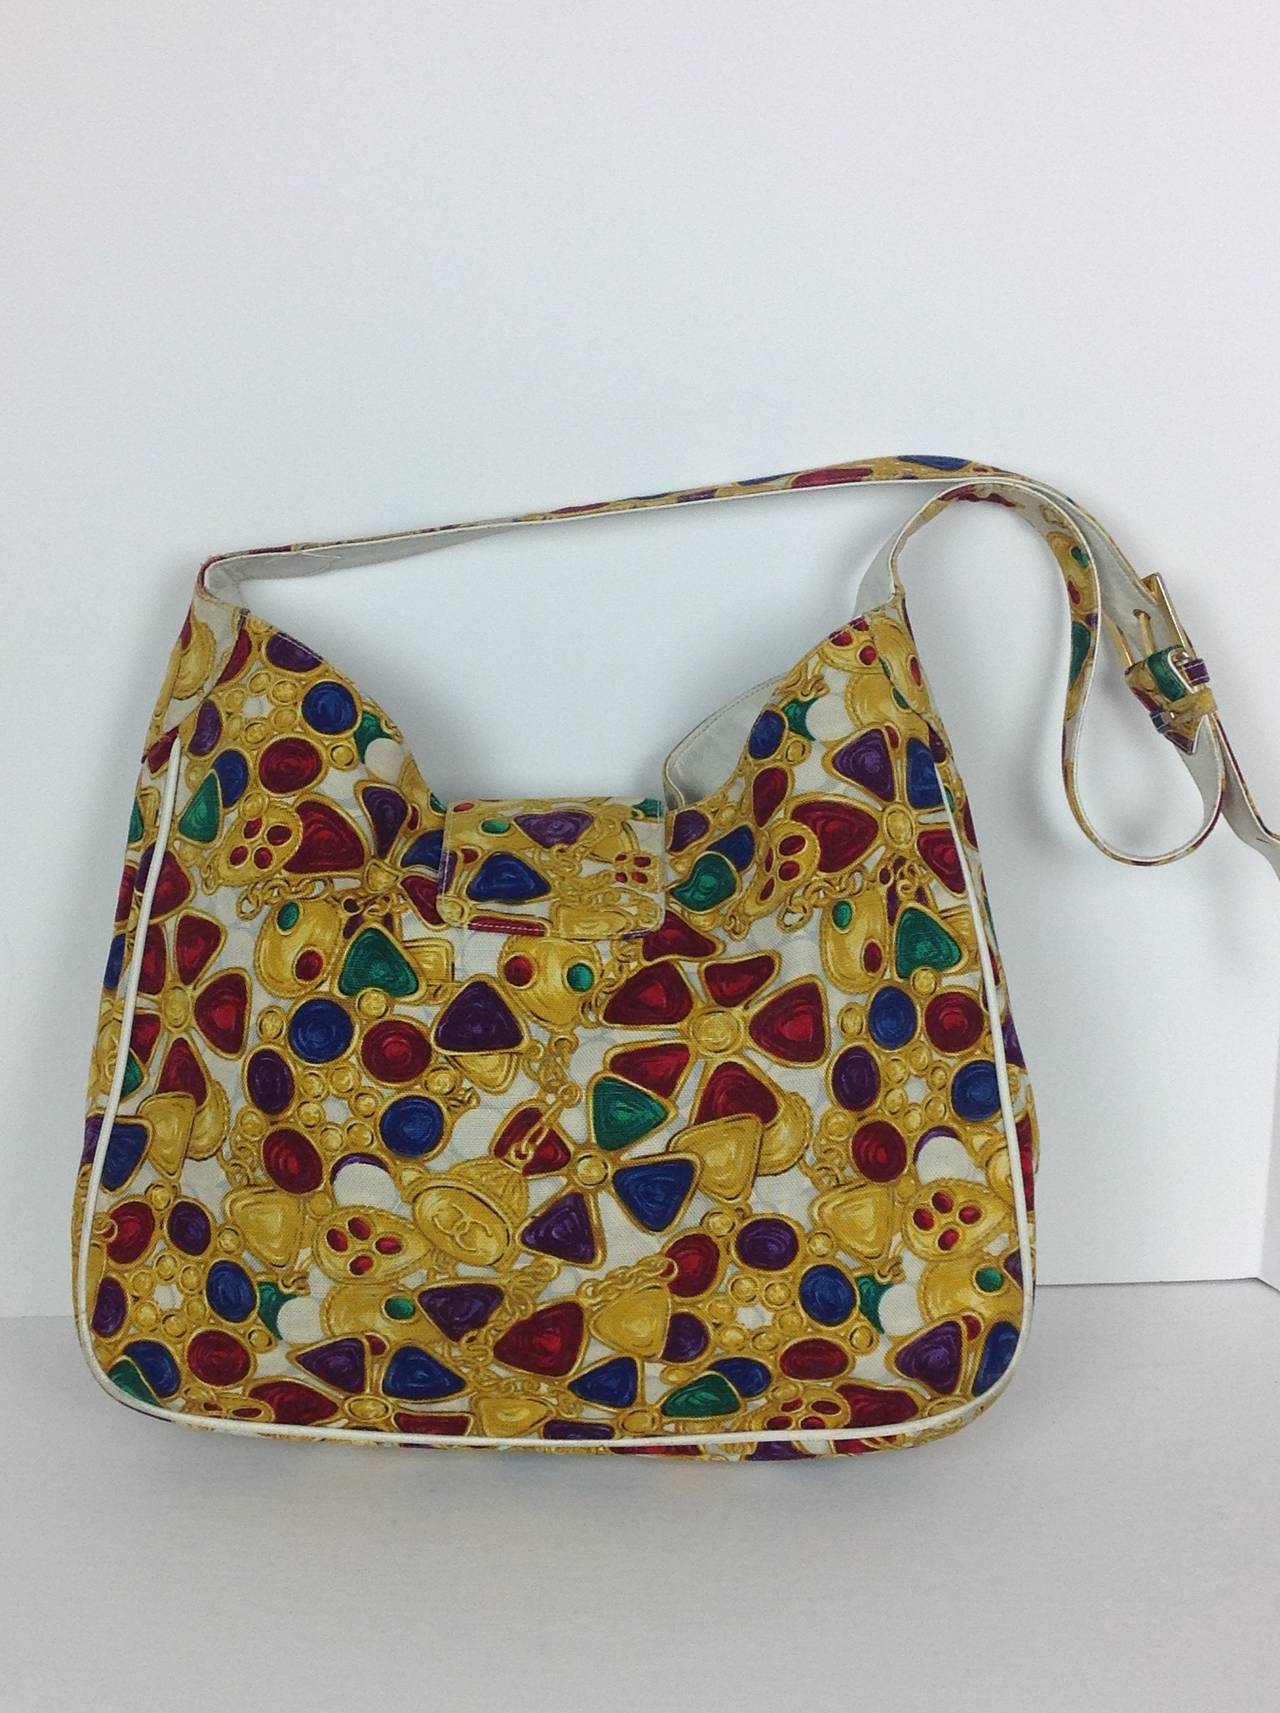 Chanel Jewel printed Canvas Shoulder Handbag In Good Condition For Sale In Palm Beach, FL